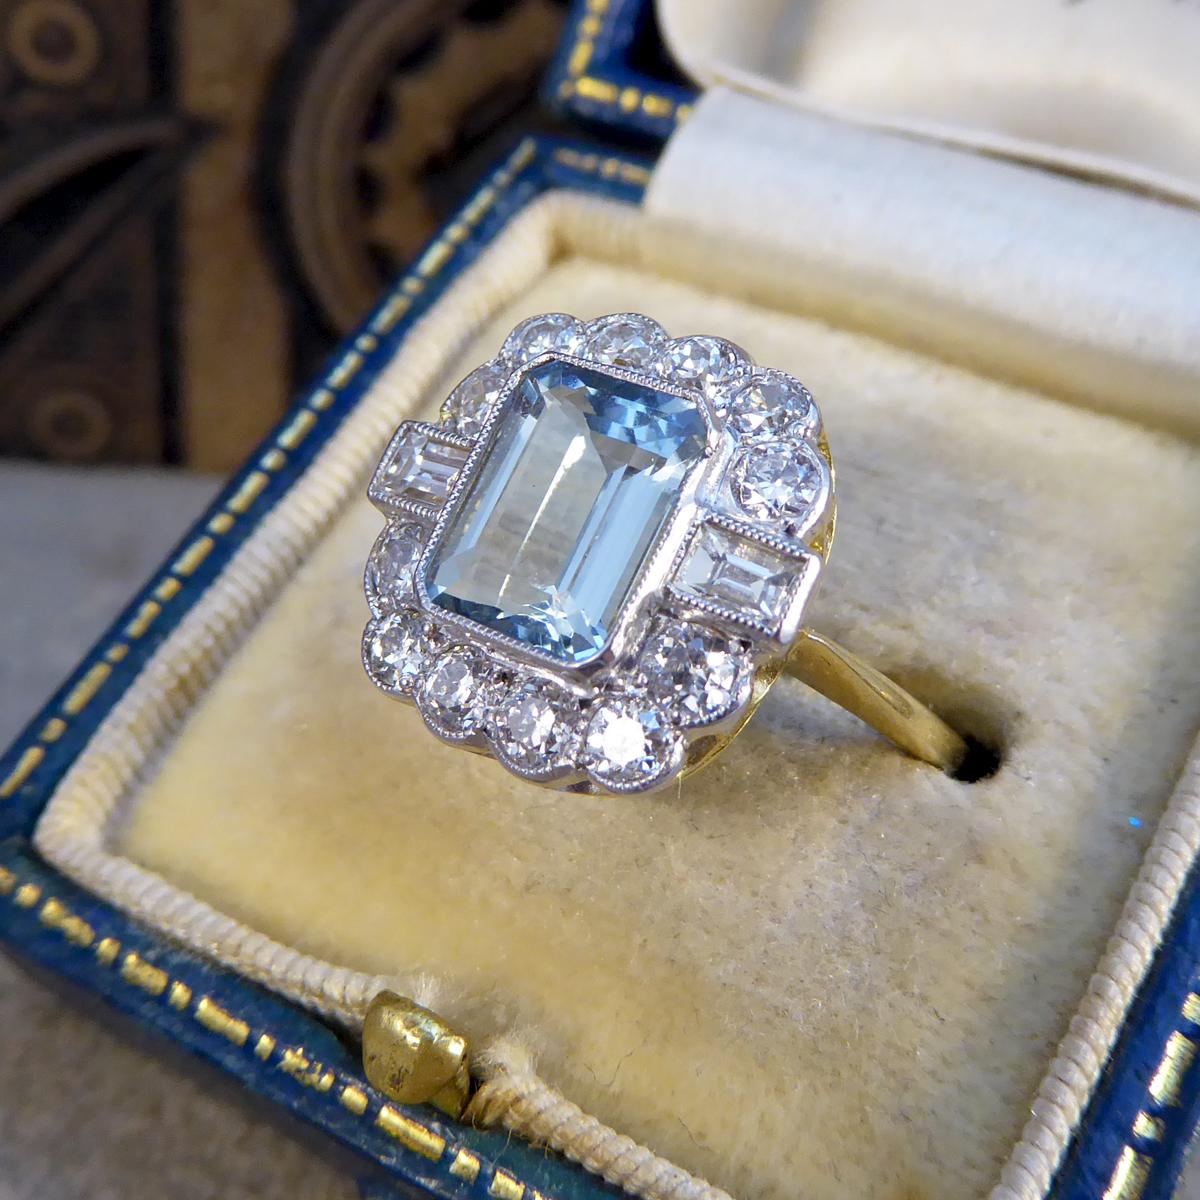 Contemporary Edwardian Style 1.50 Carat Aquamarine and Diamond Ring in 18ct Gold 3